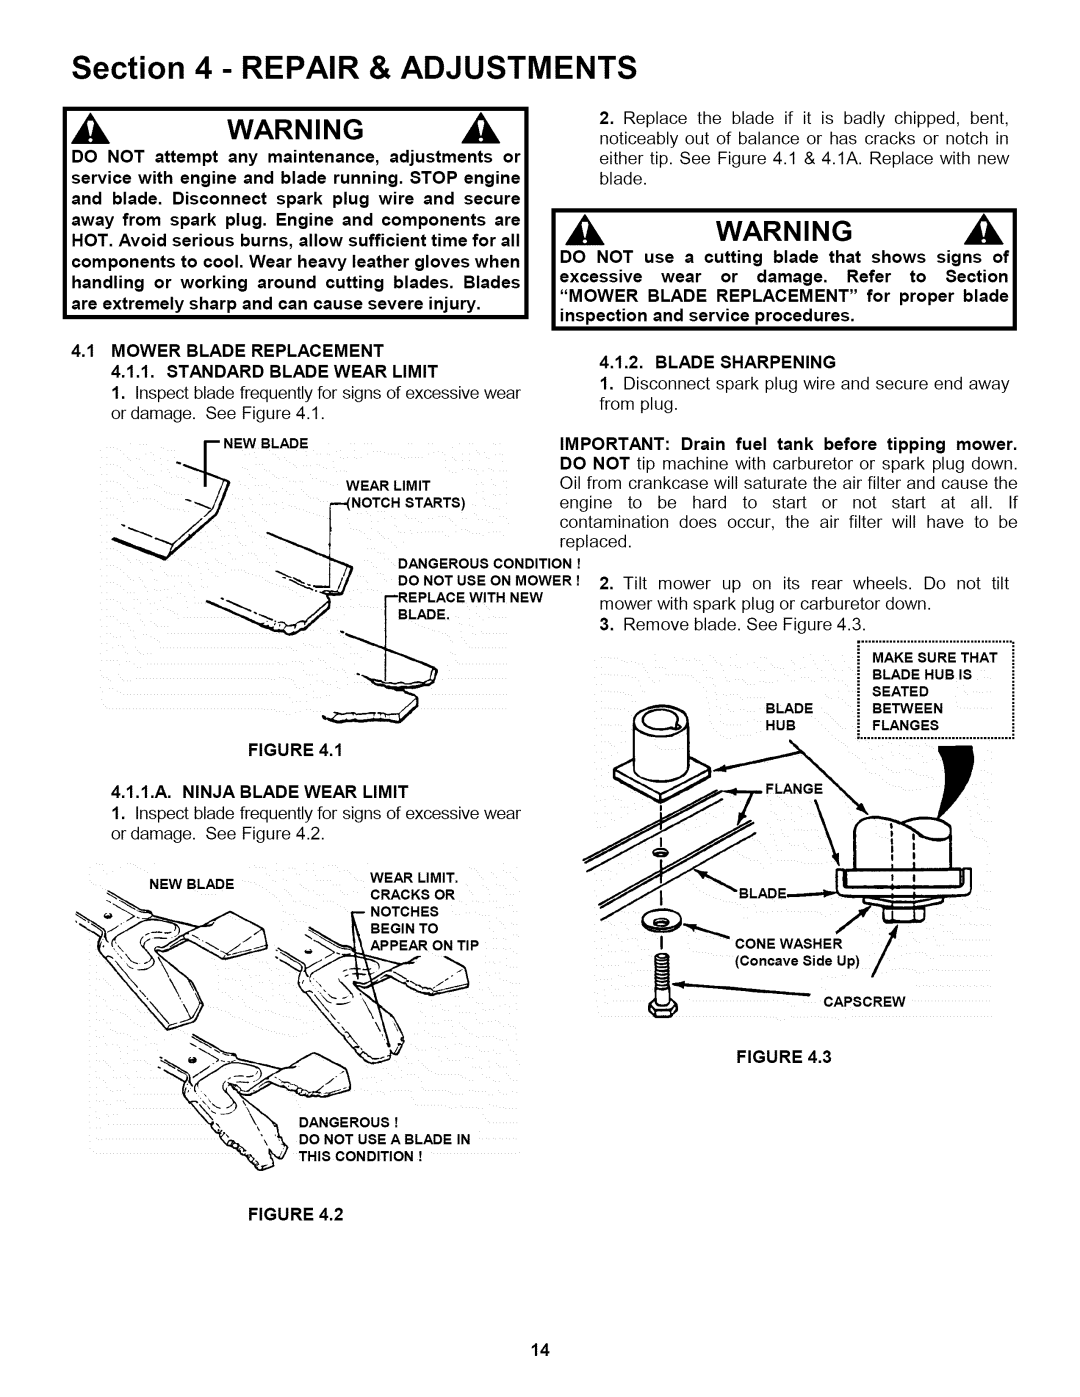 Snapper P2167517BVE, WP216517B important safety instructions Repair & Adjustments, iMAKESORETHATi, Figure 